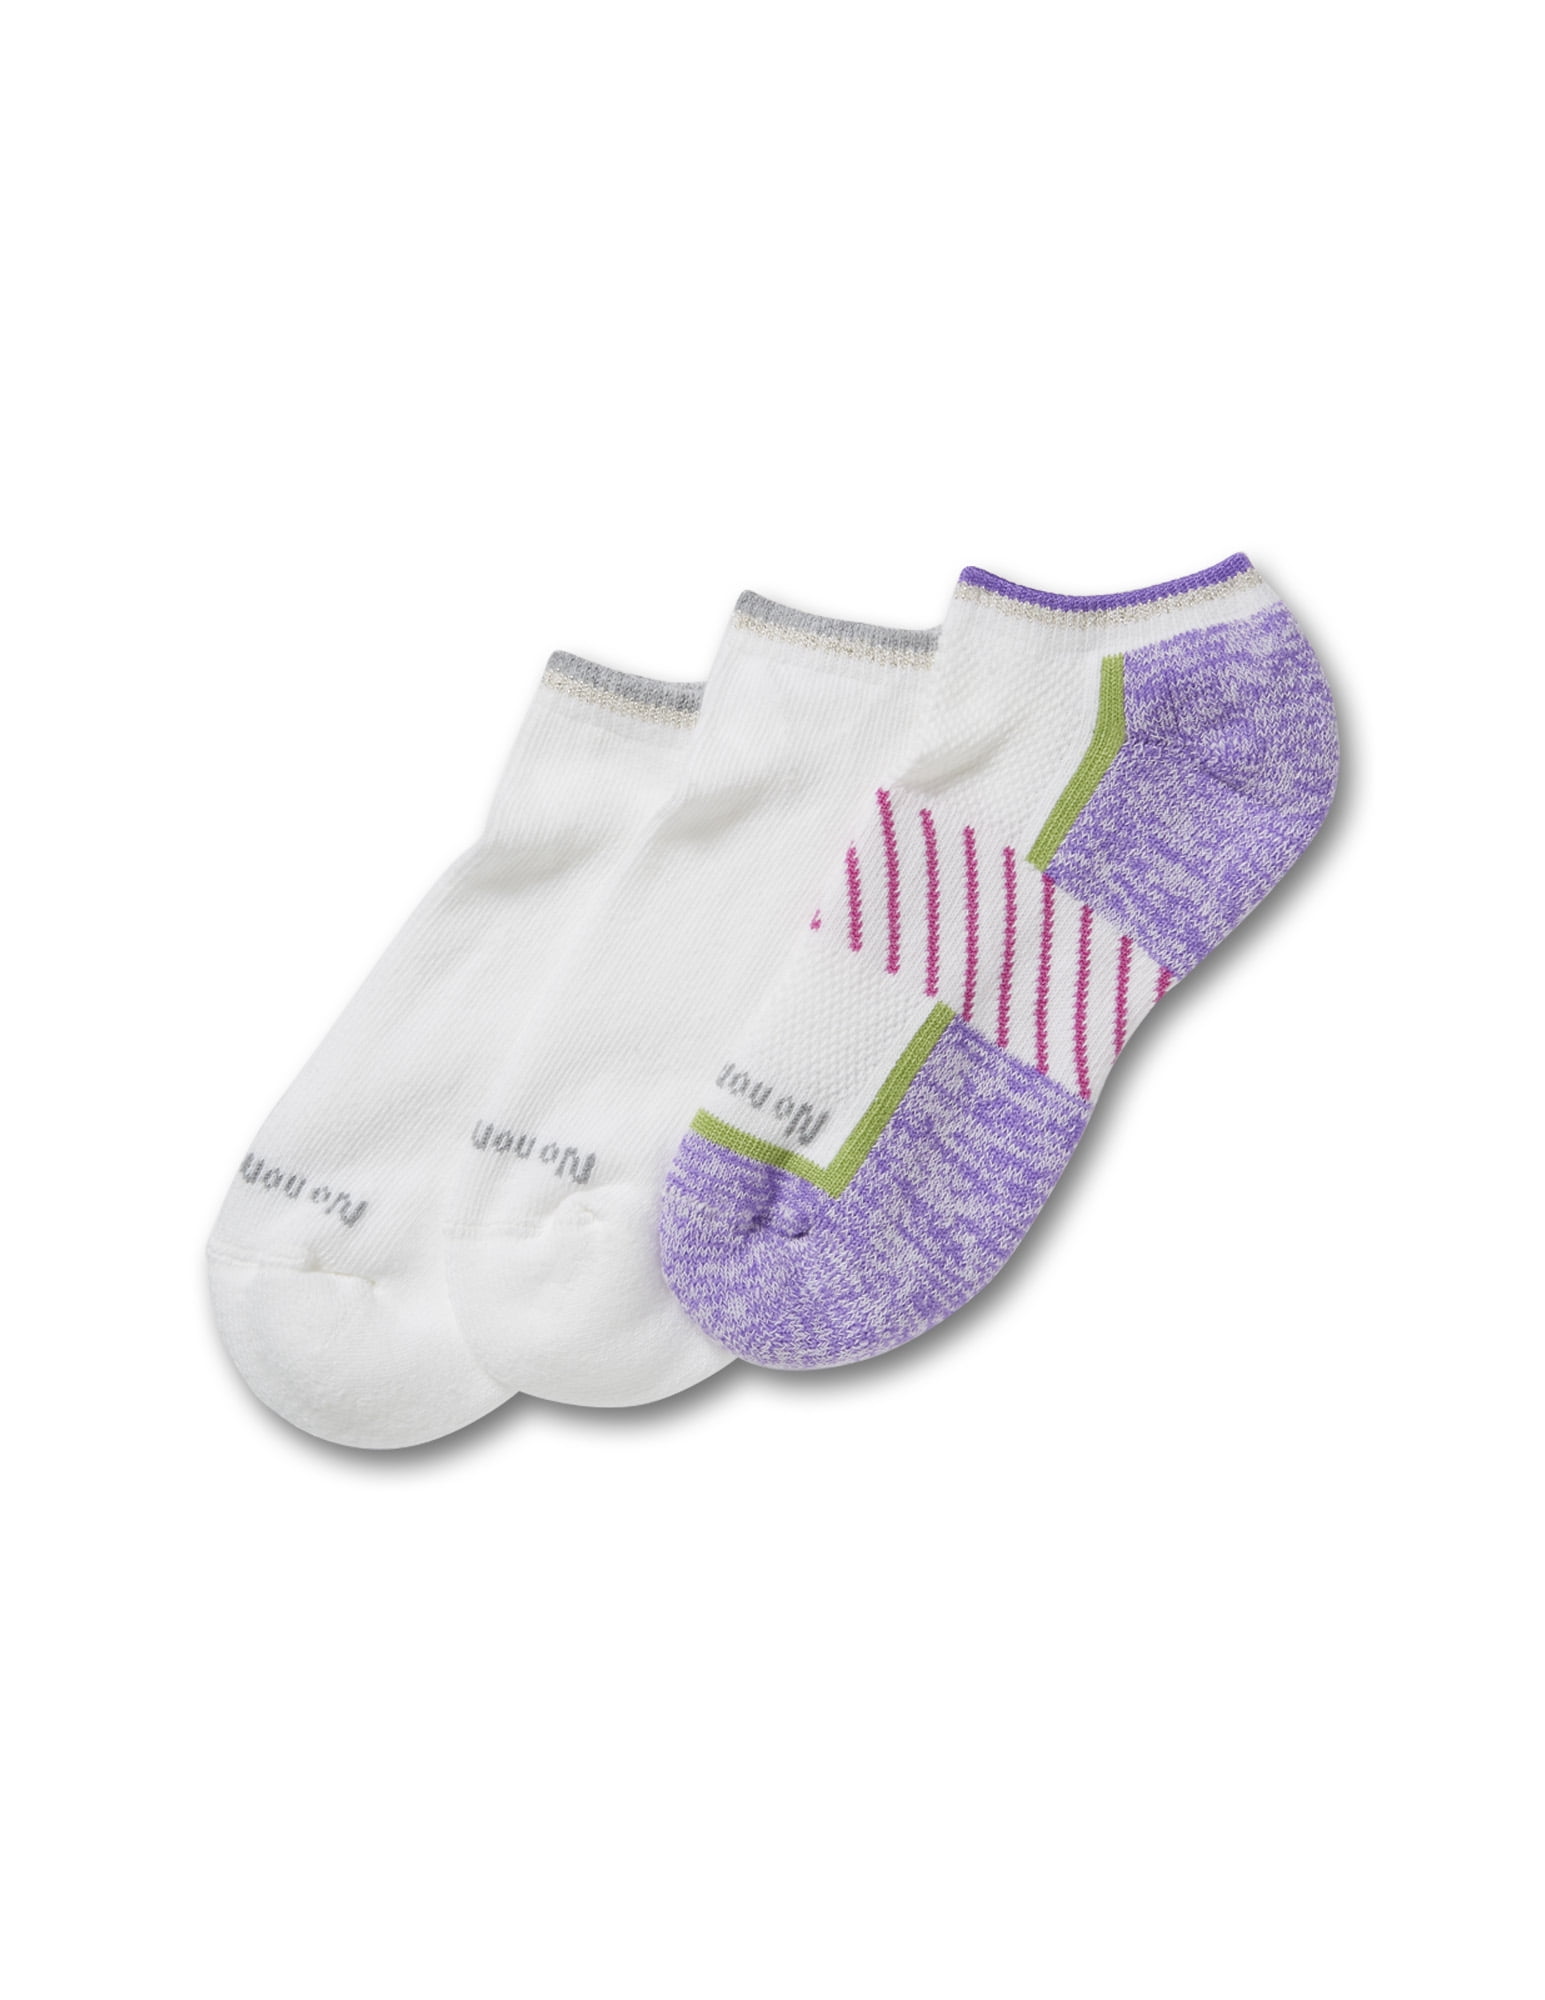 No Nonsense Women's Soft & Breathable Cushioned No Show Socks 3 Pair Pack  Deep Lavender One Size